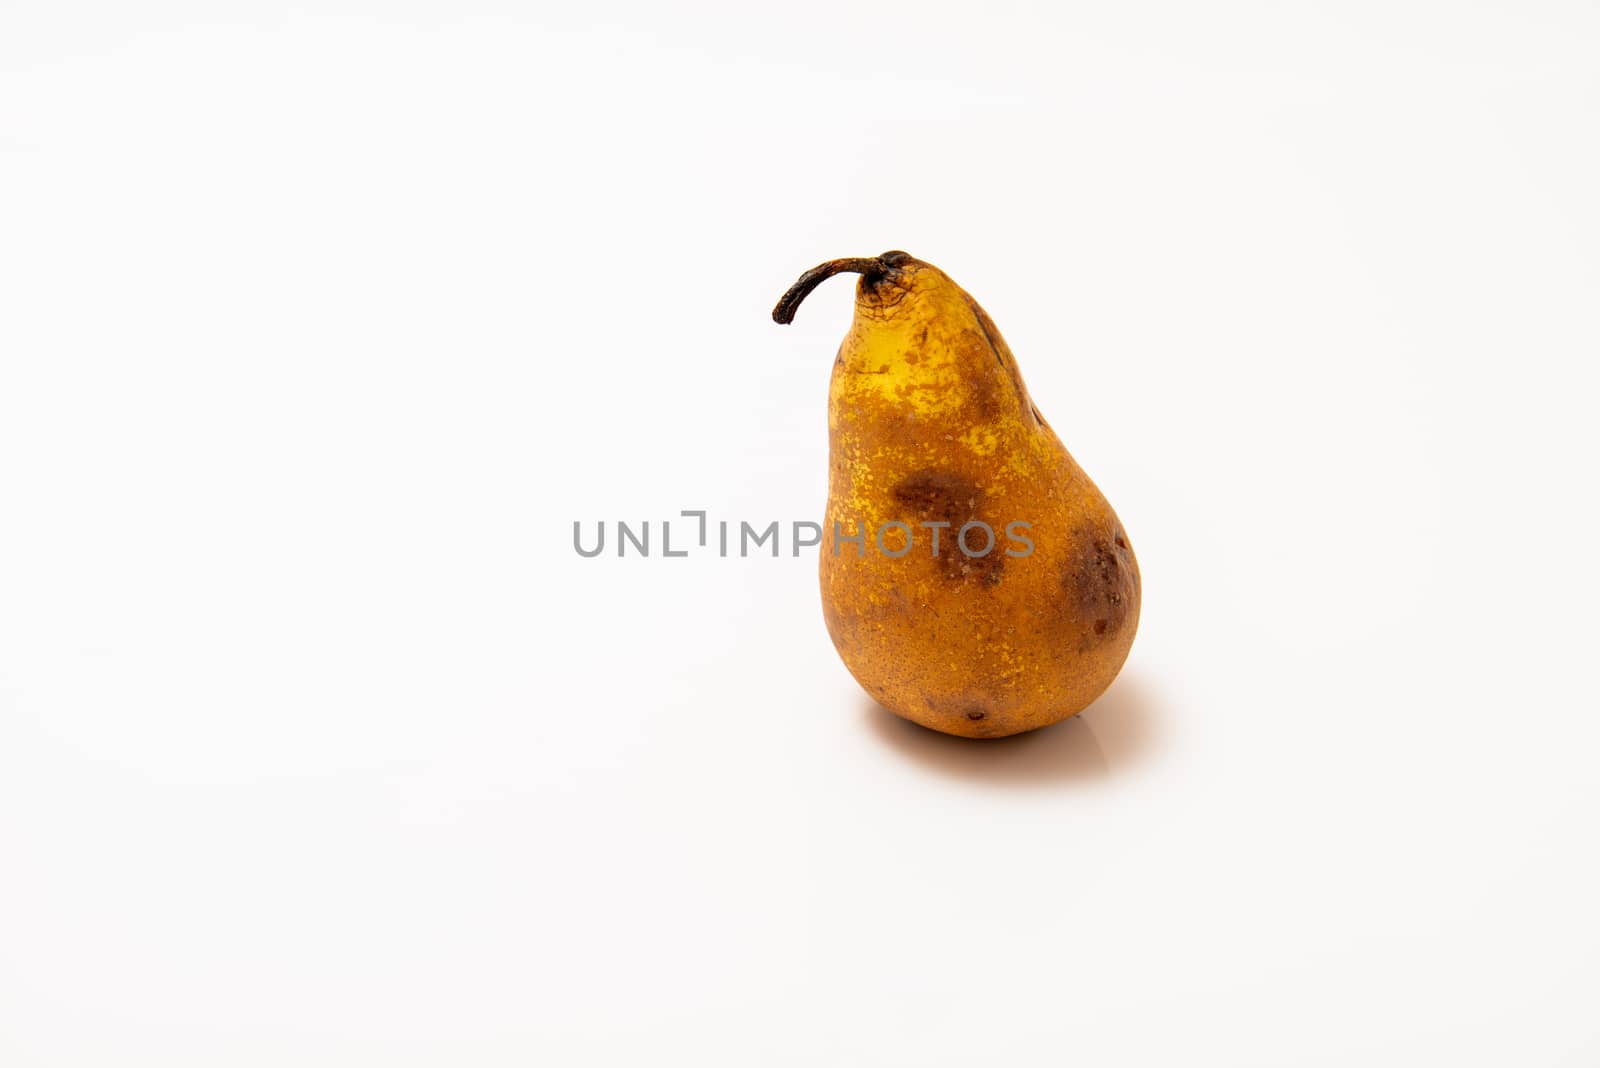 spoiled pear on an isolated white background by marynkin